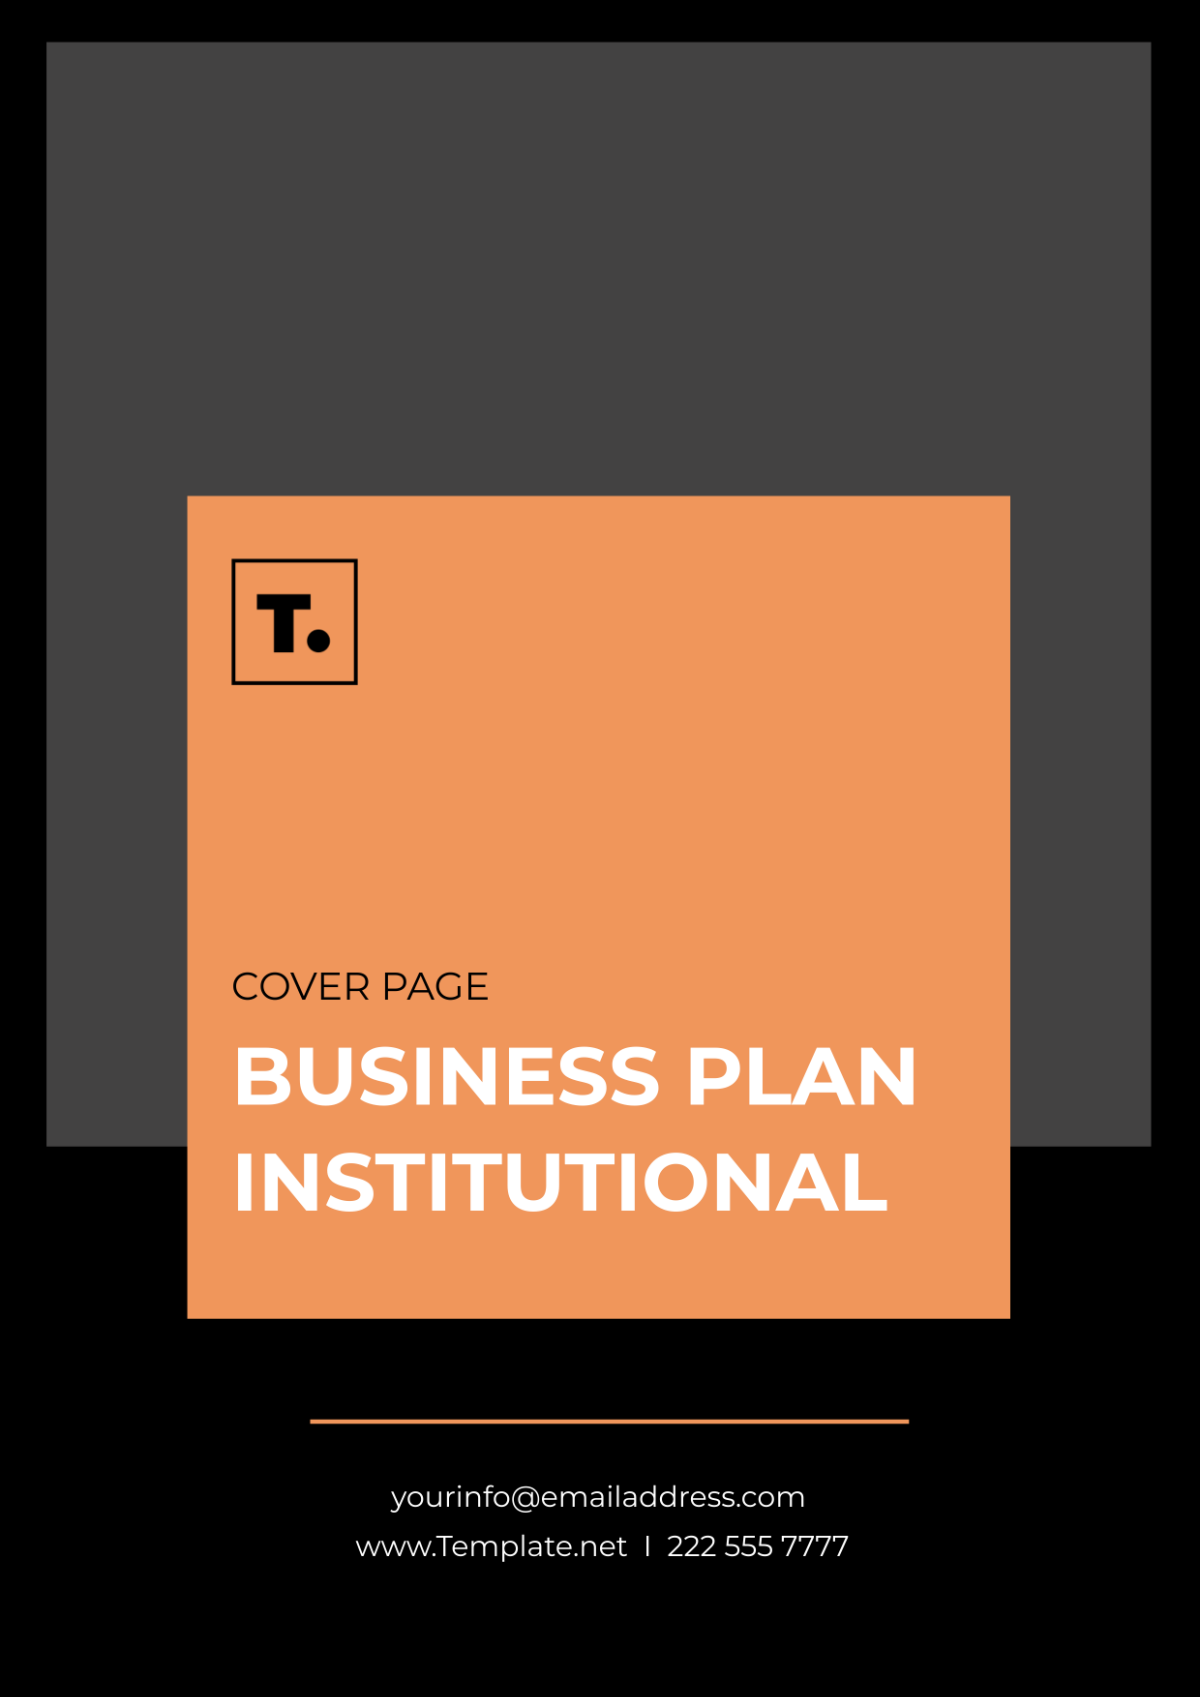 Business Plan Institutional Cover Page Template